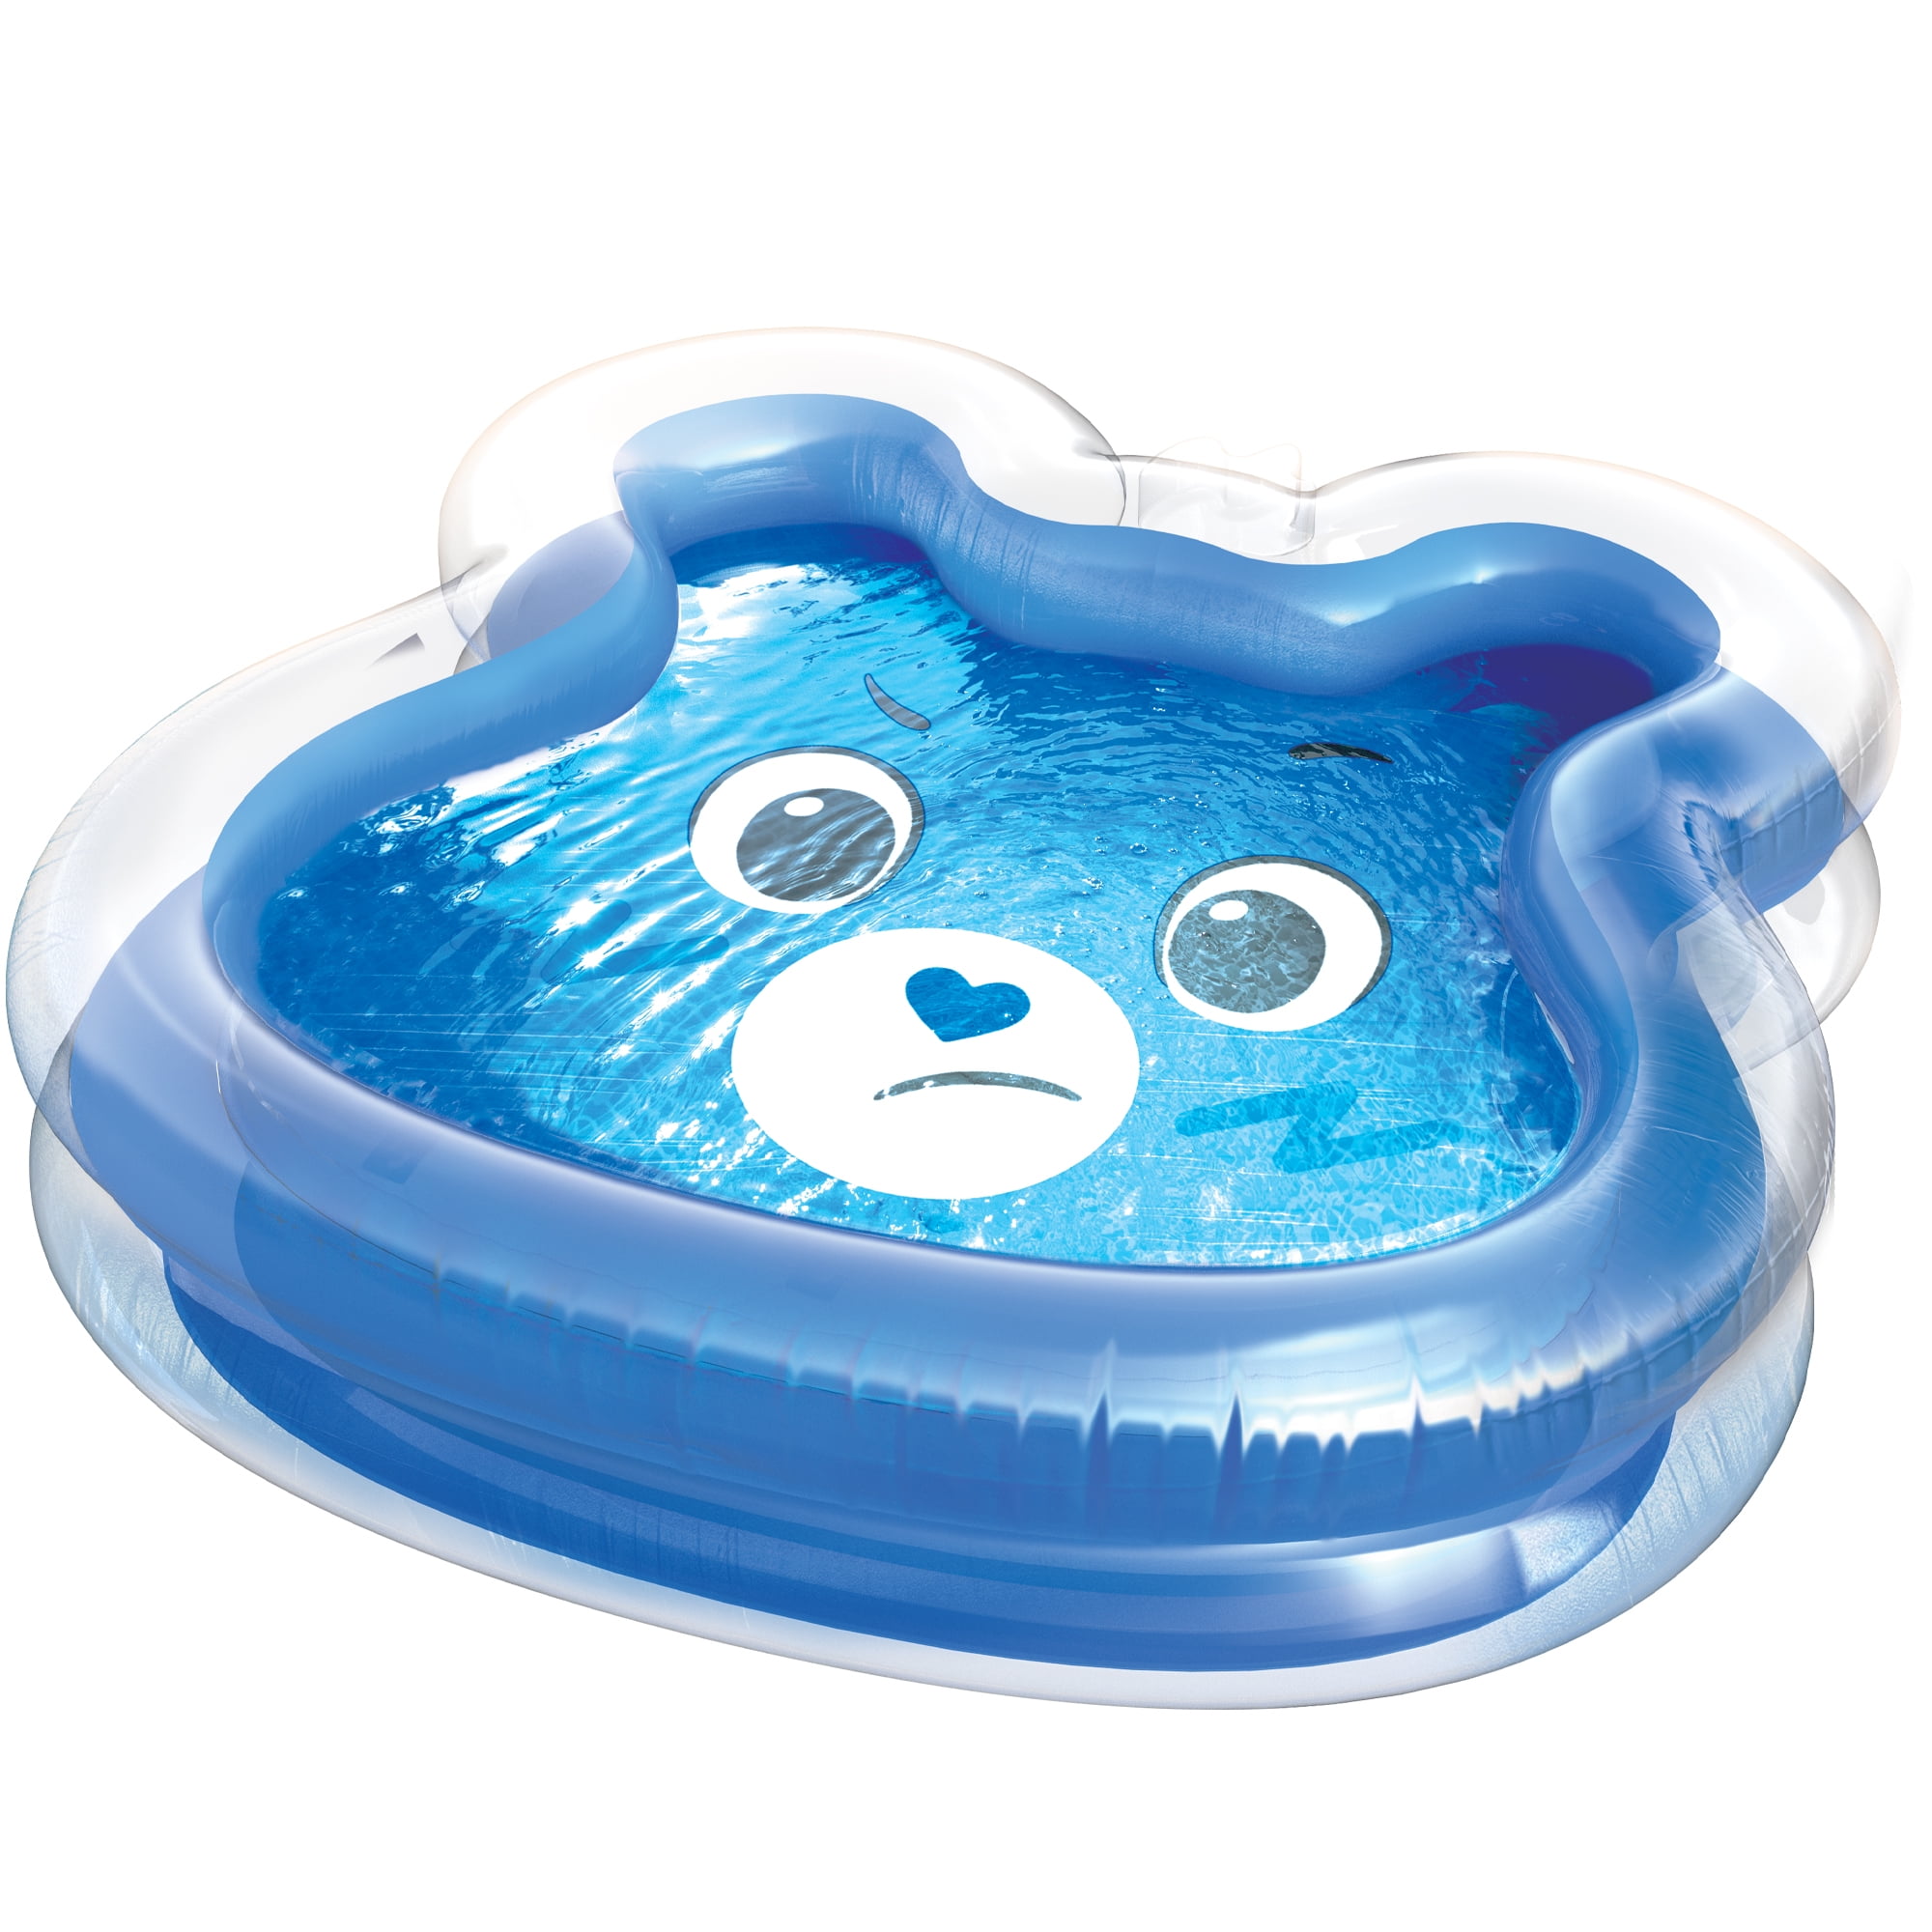 Care Bears Grumpy Bear Kiddie Pool, for Ages 3 and Up